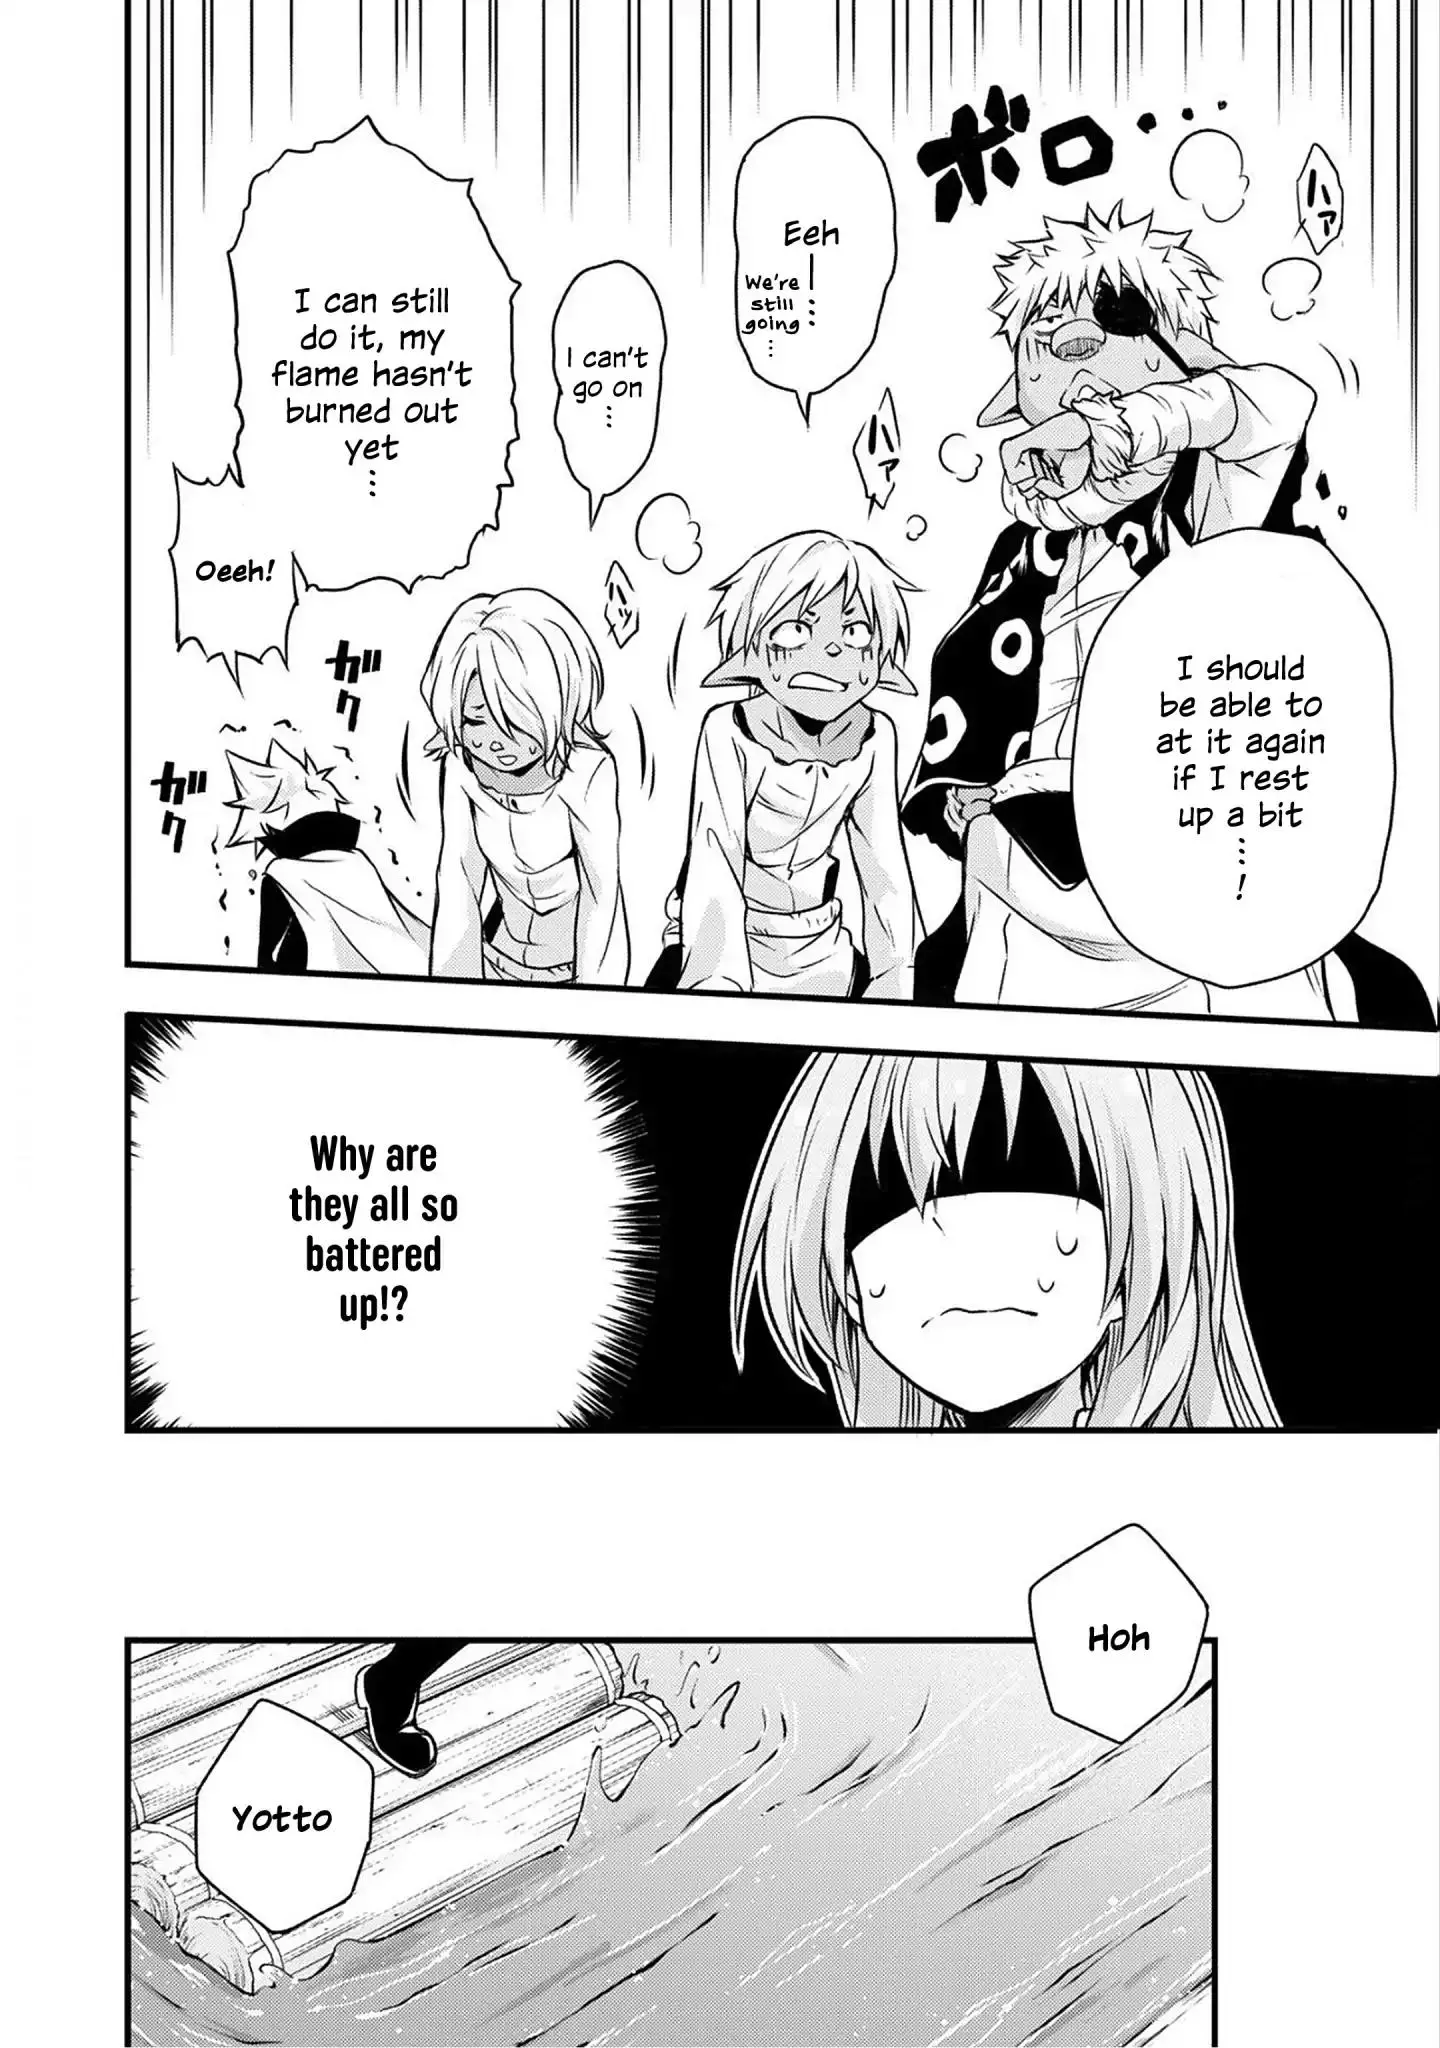 Tensei Shitara Slime Datta Ken: The Ways of Strolling in the Demon Country - 24 page 7